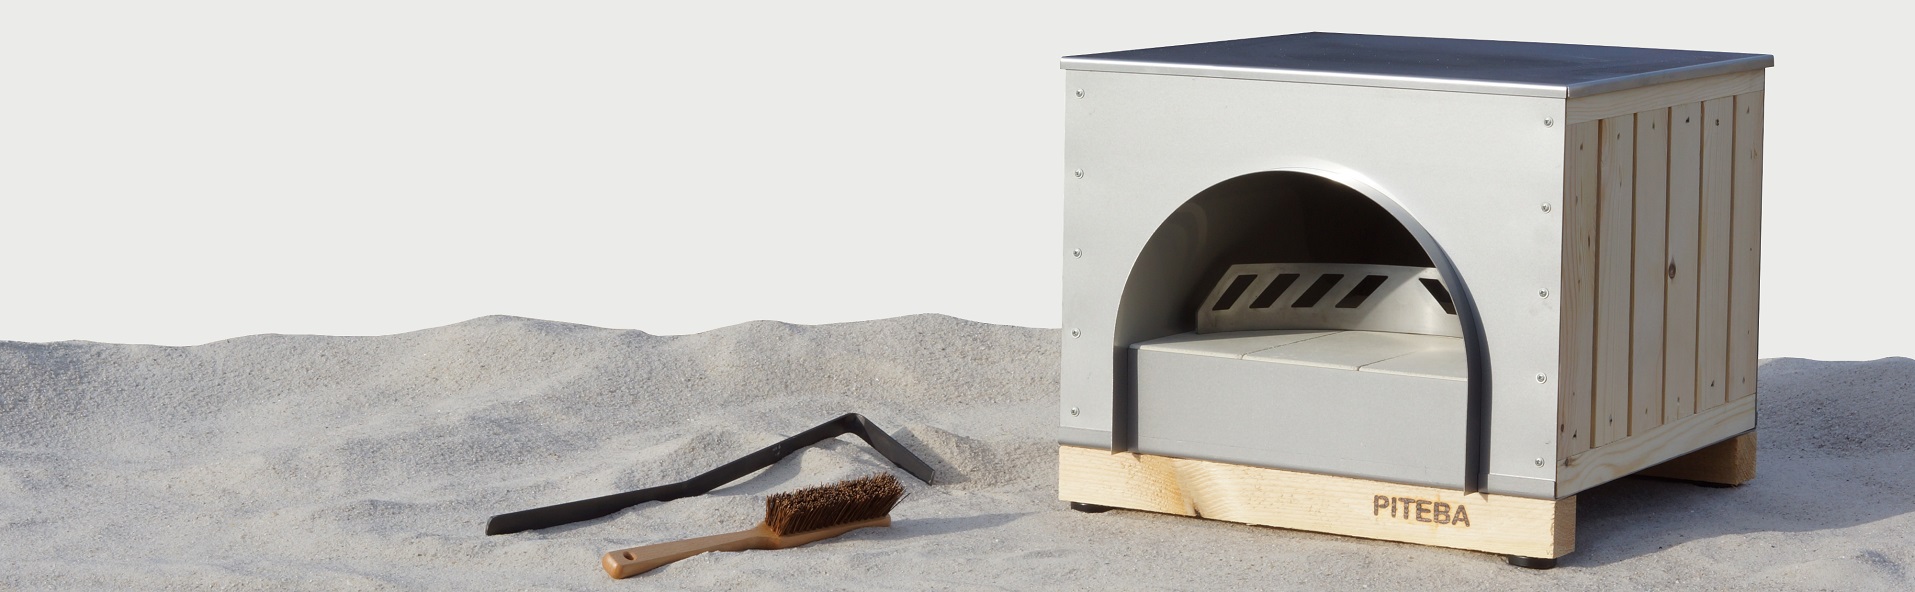 PITEBA Outdoor wood-fired pizza oven